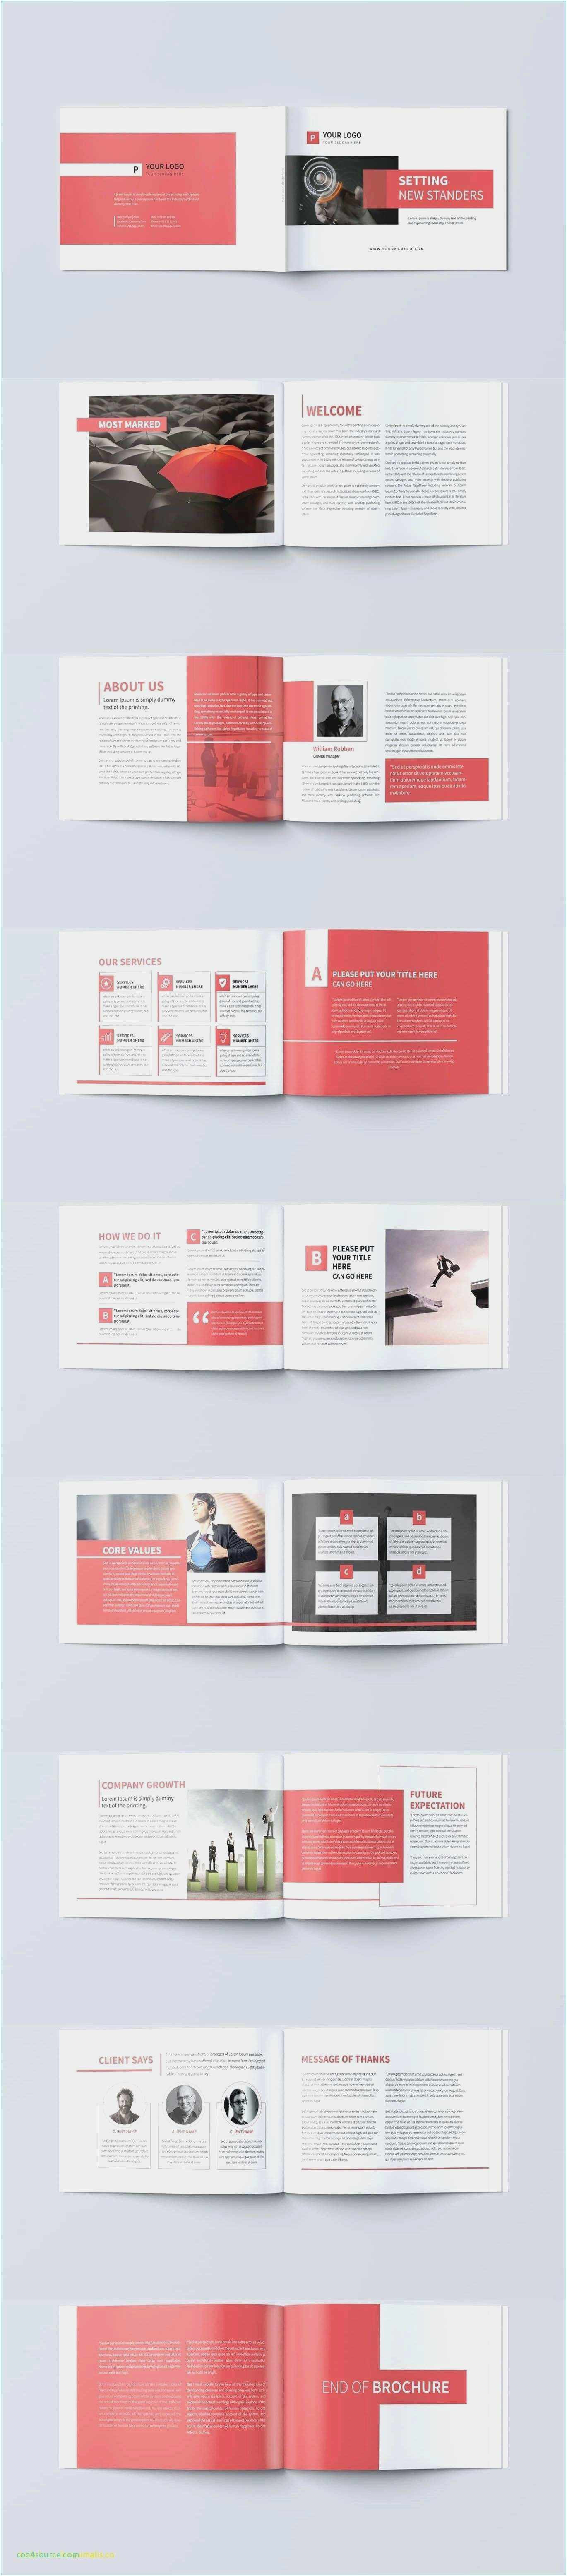 free brochure template free cool conference flyer template c2a2c28be280a0c285 0d dog model